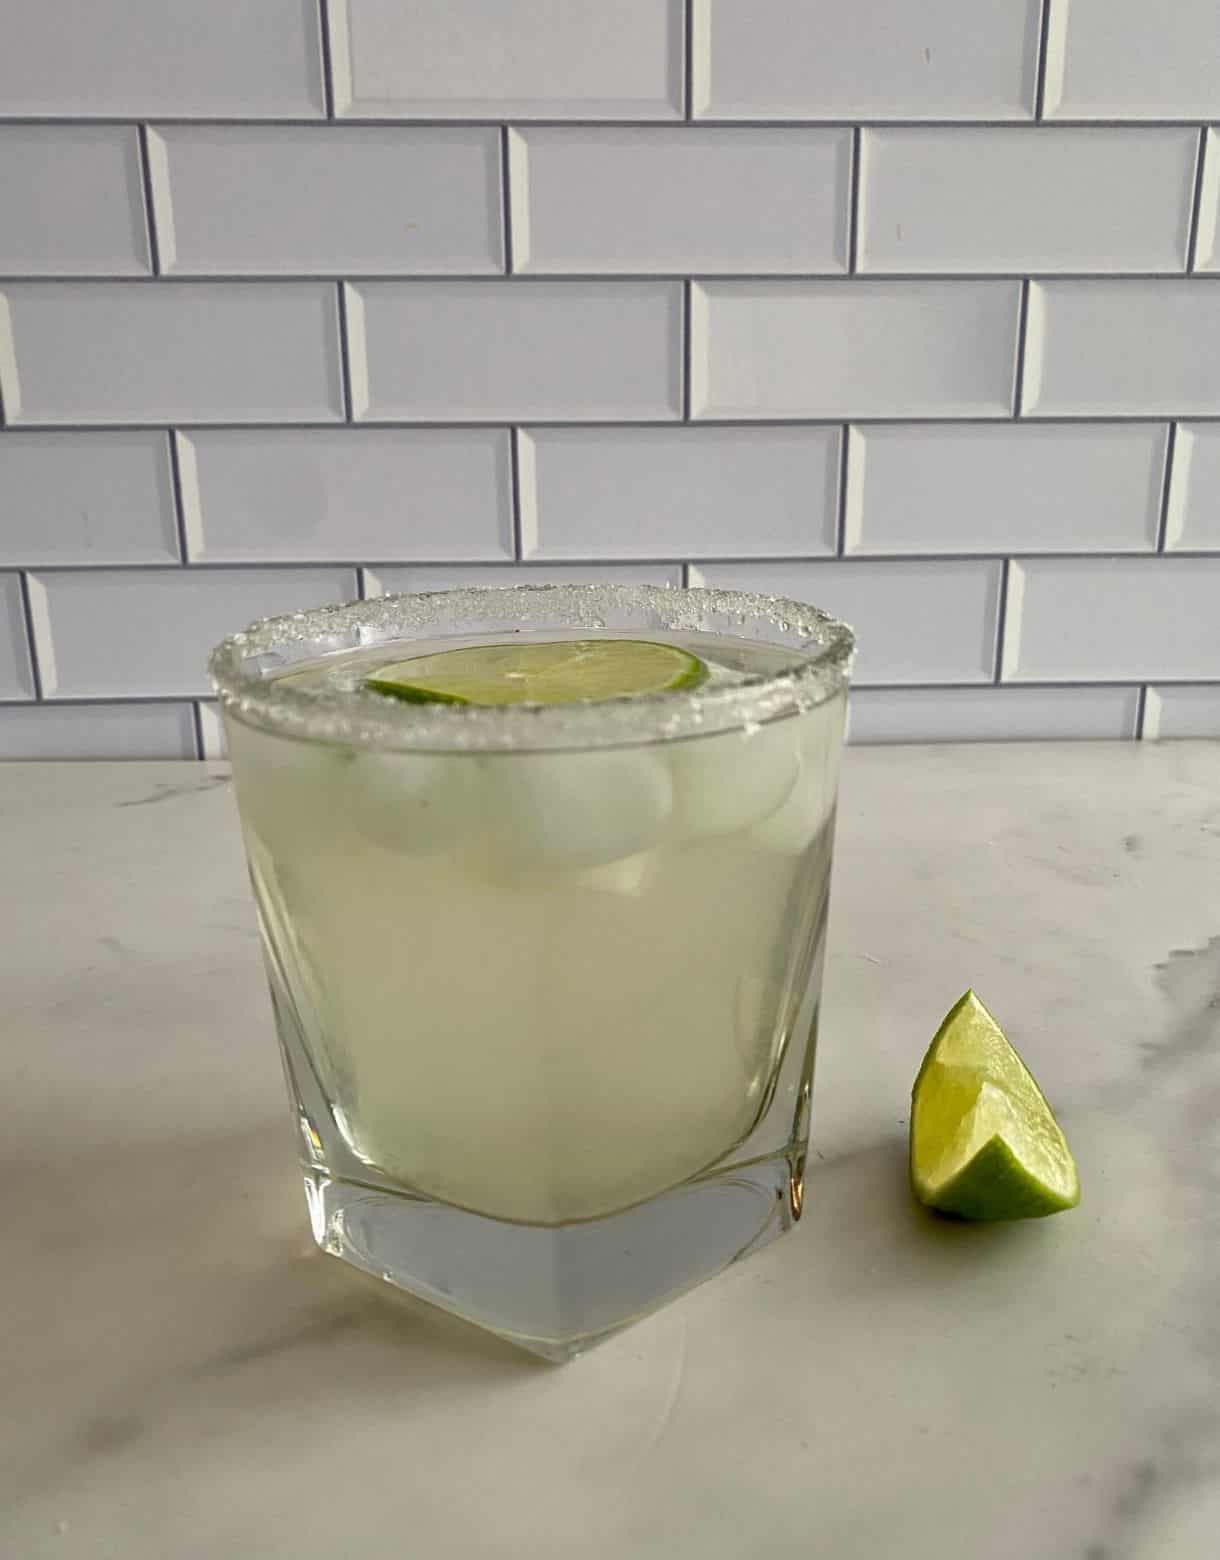 A Coconut Water Cocktail in a glass with a wedge of lime and a salted rim.